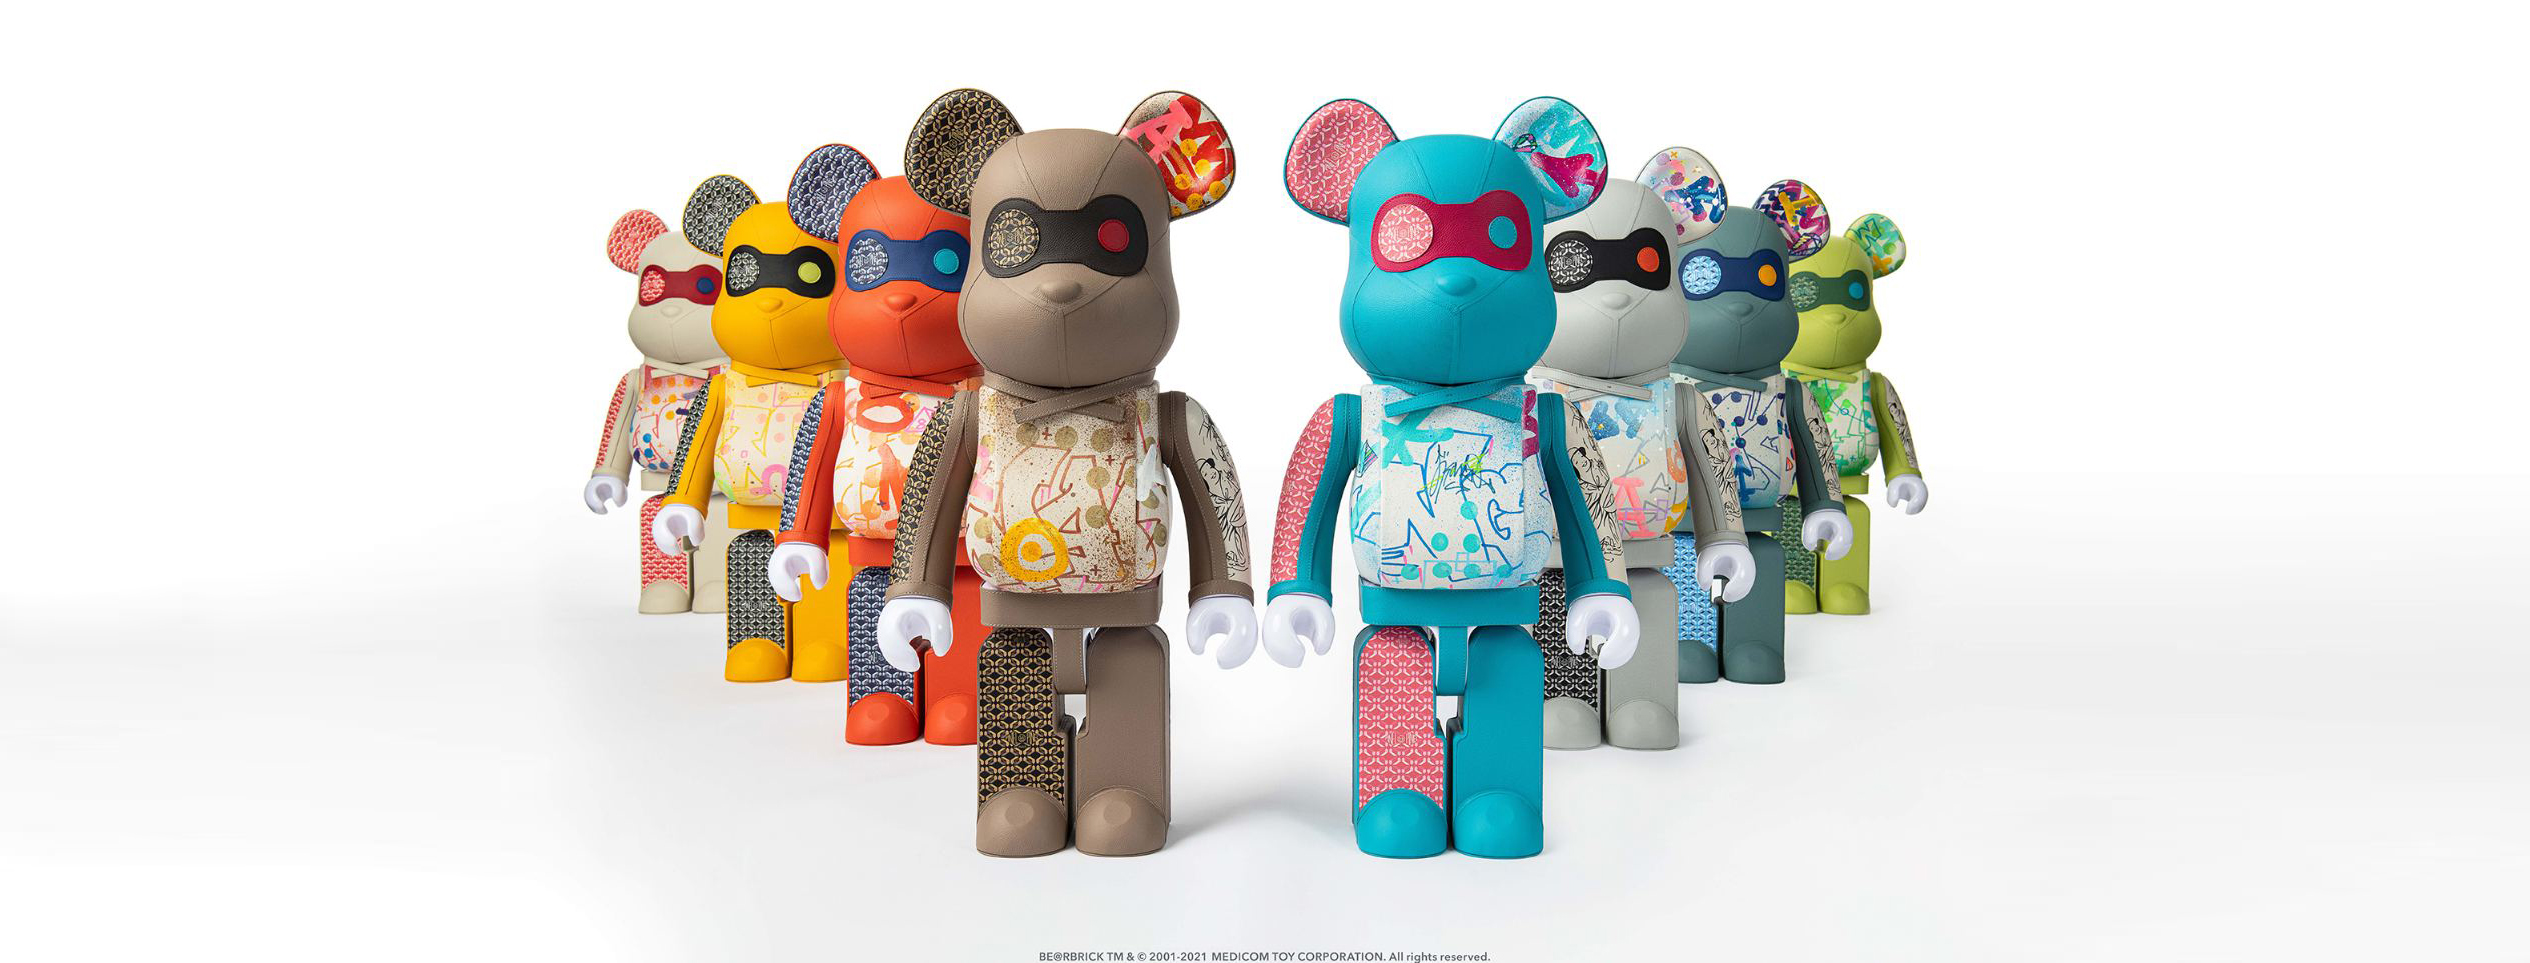 Be@rbrick limited collection / Cyril Kongo x Pinel et Pinel x Medicom toy